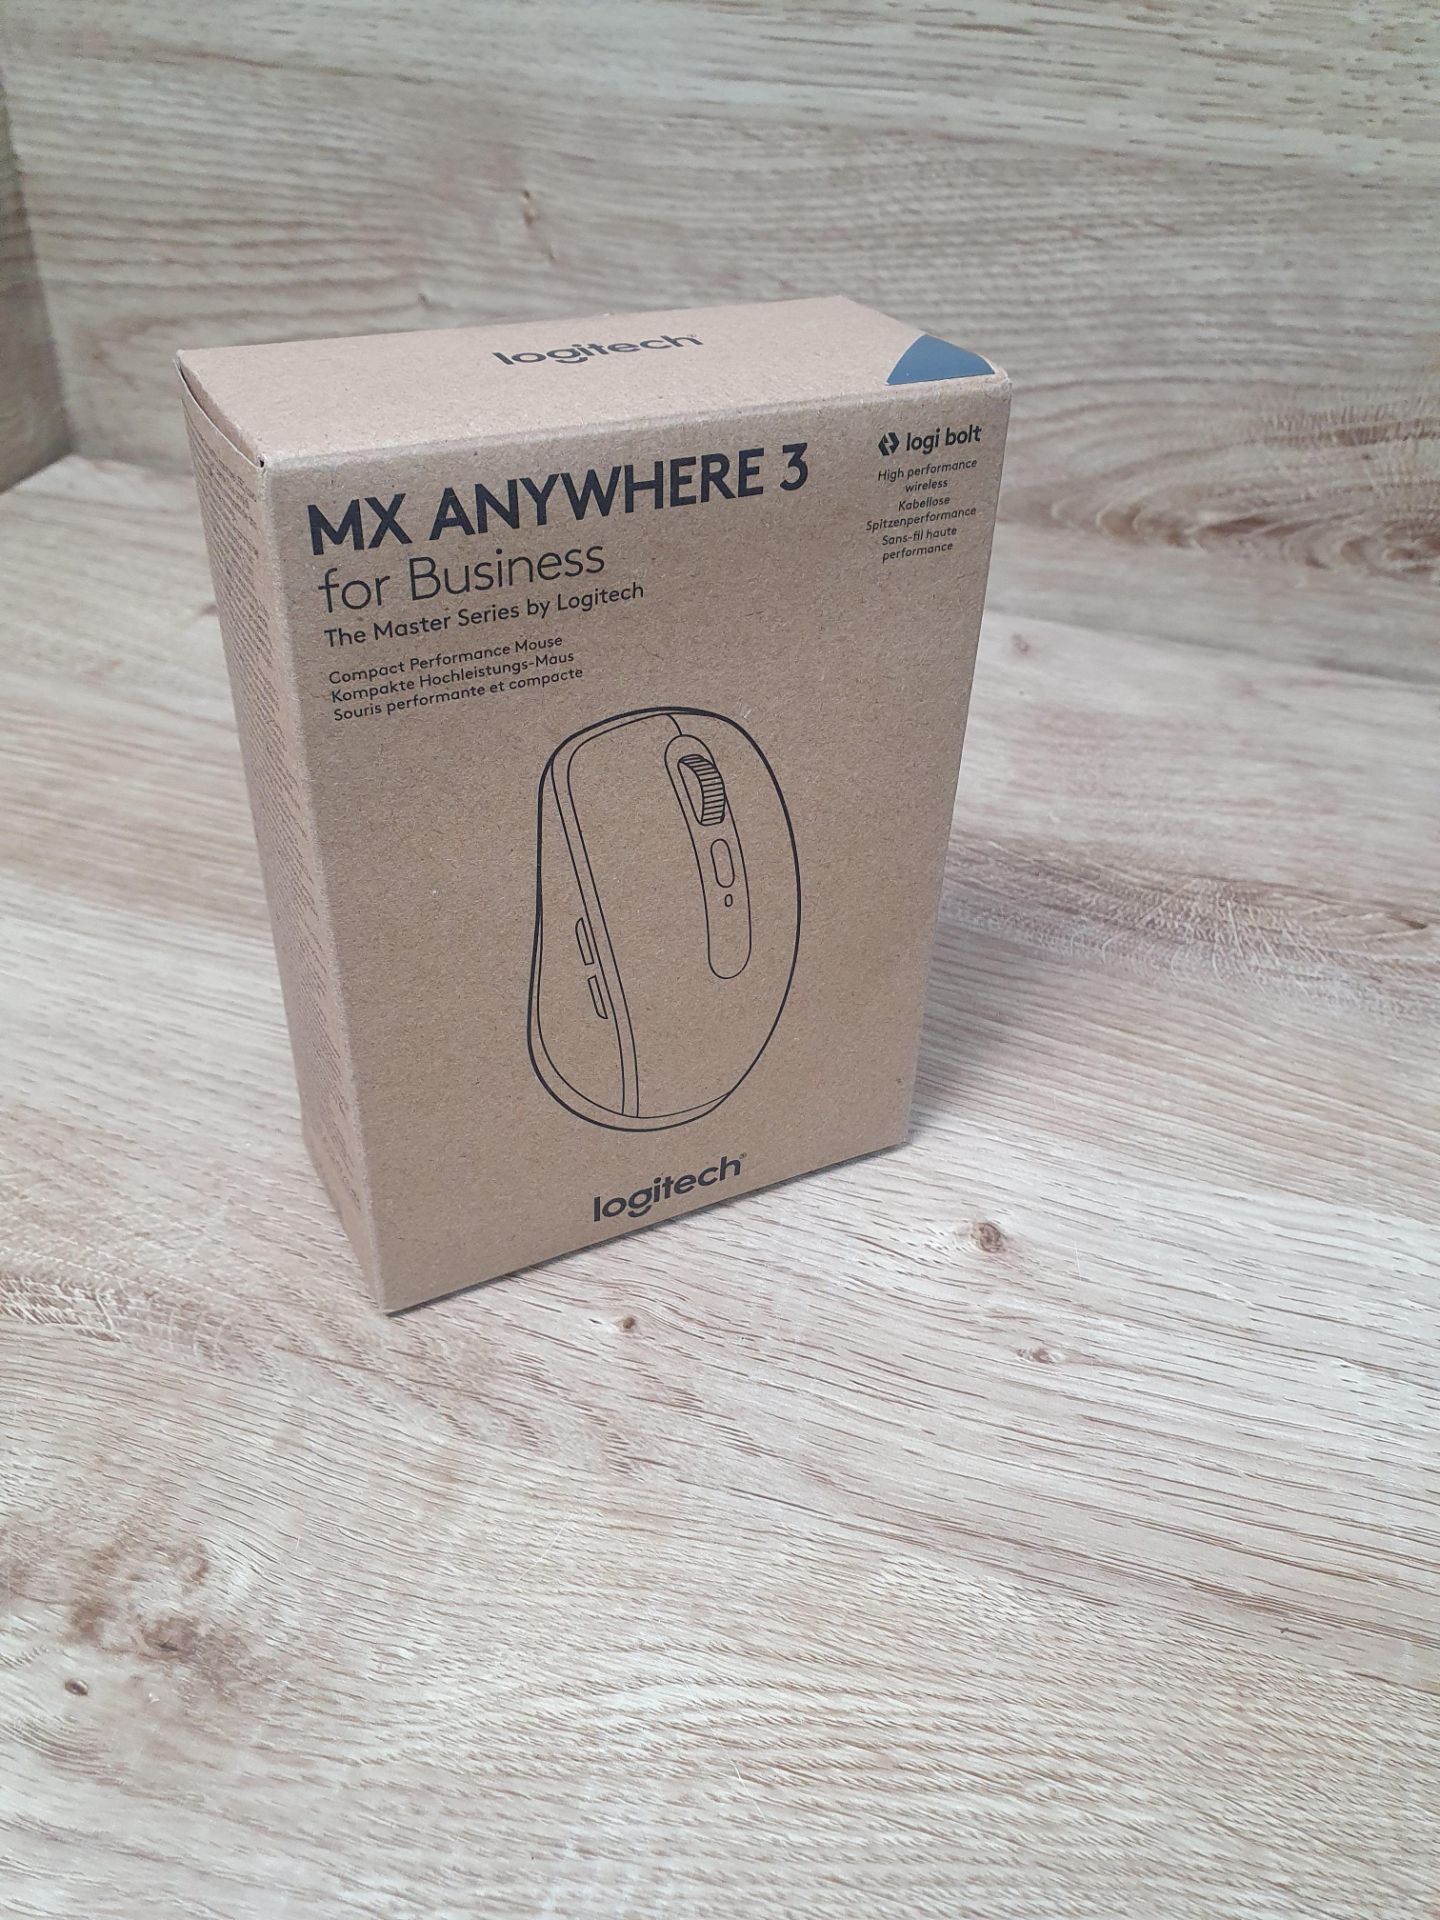 * Logitech MX Anywhere 3 for business RRP £90